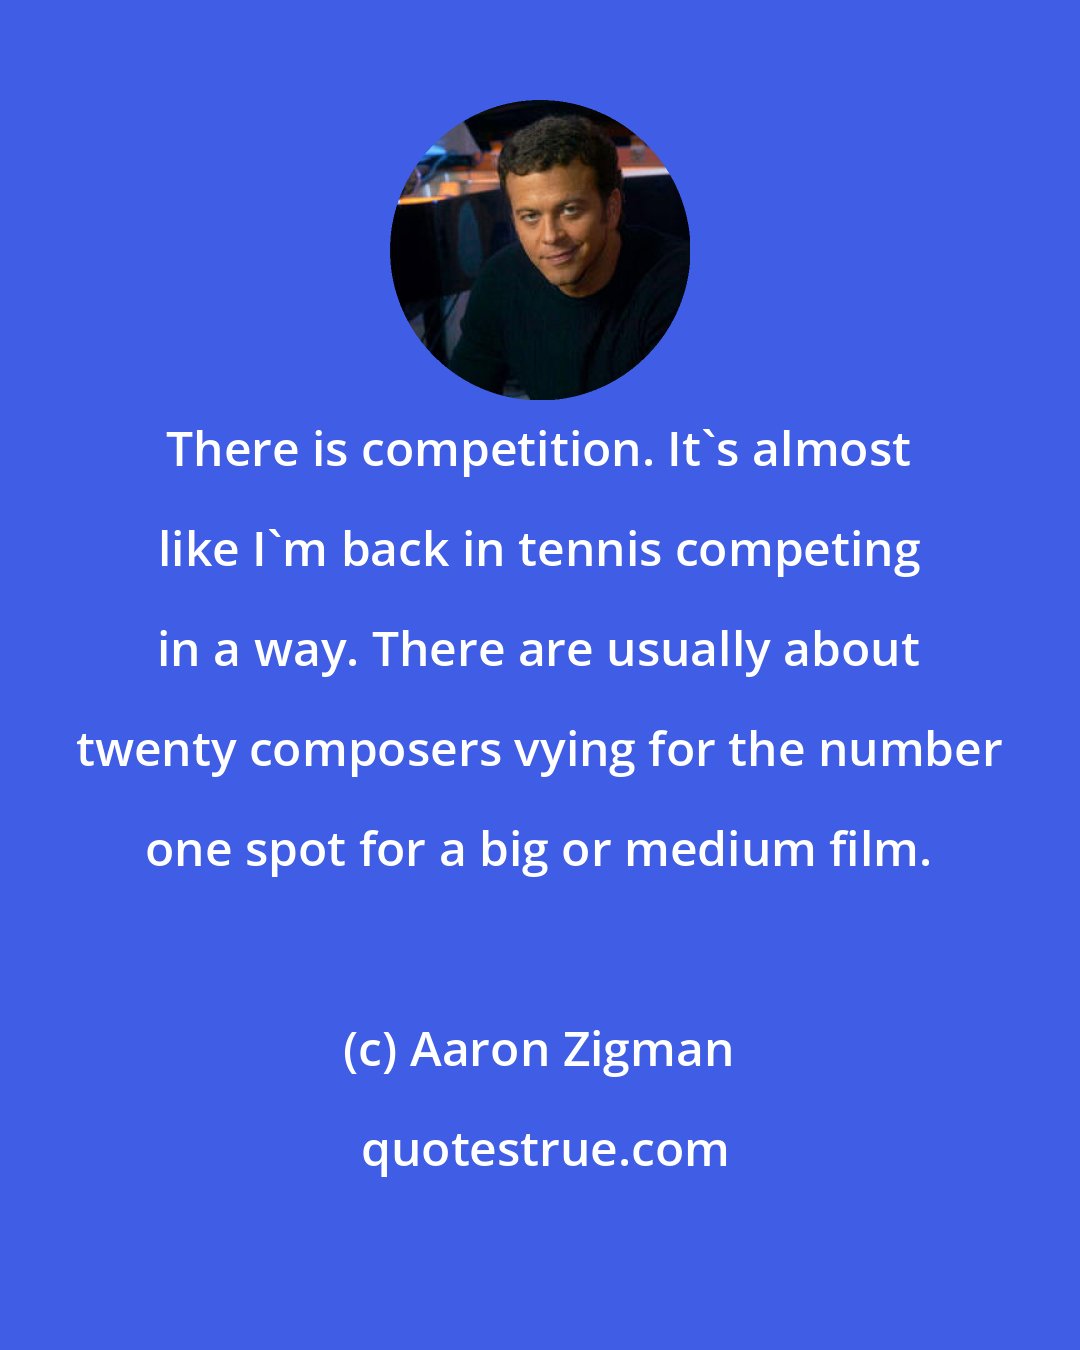 Aaron Zigman: There is competition. It's almost like I'm back in tennis competing in a way. There are usually about twenty composers vying for the number one spot for a big or medium film.